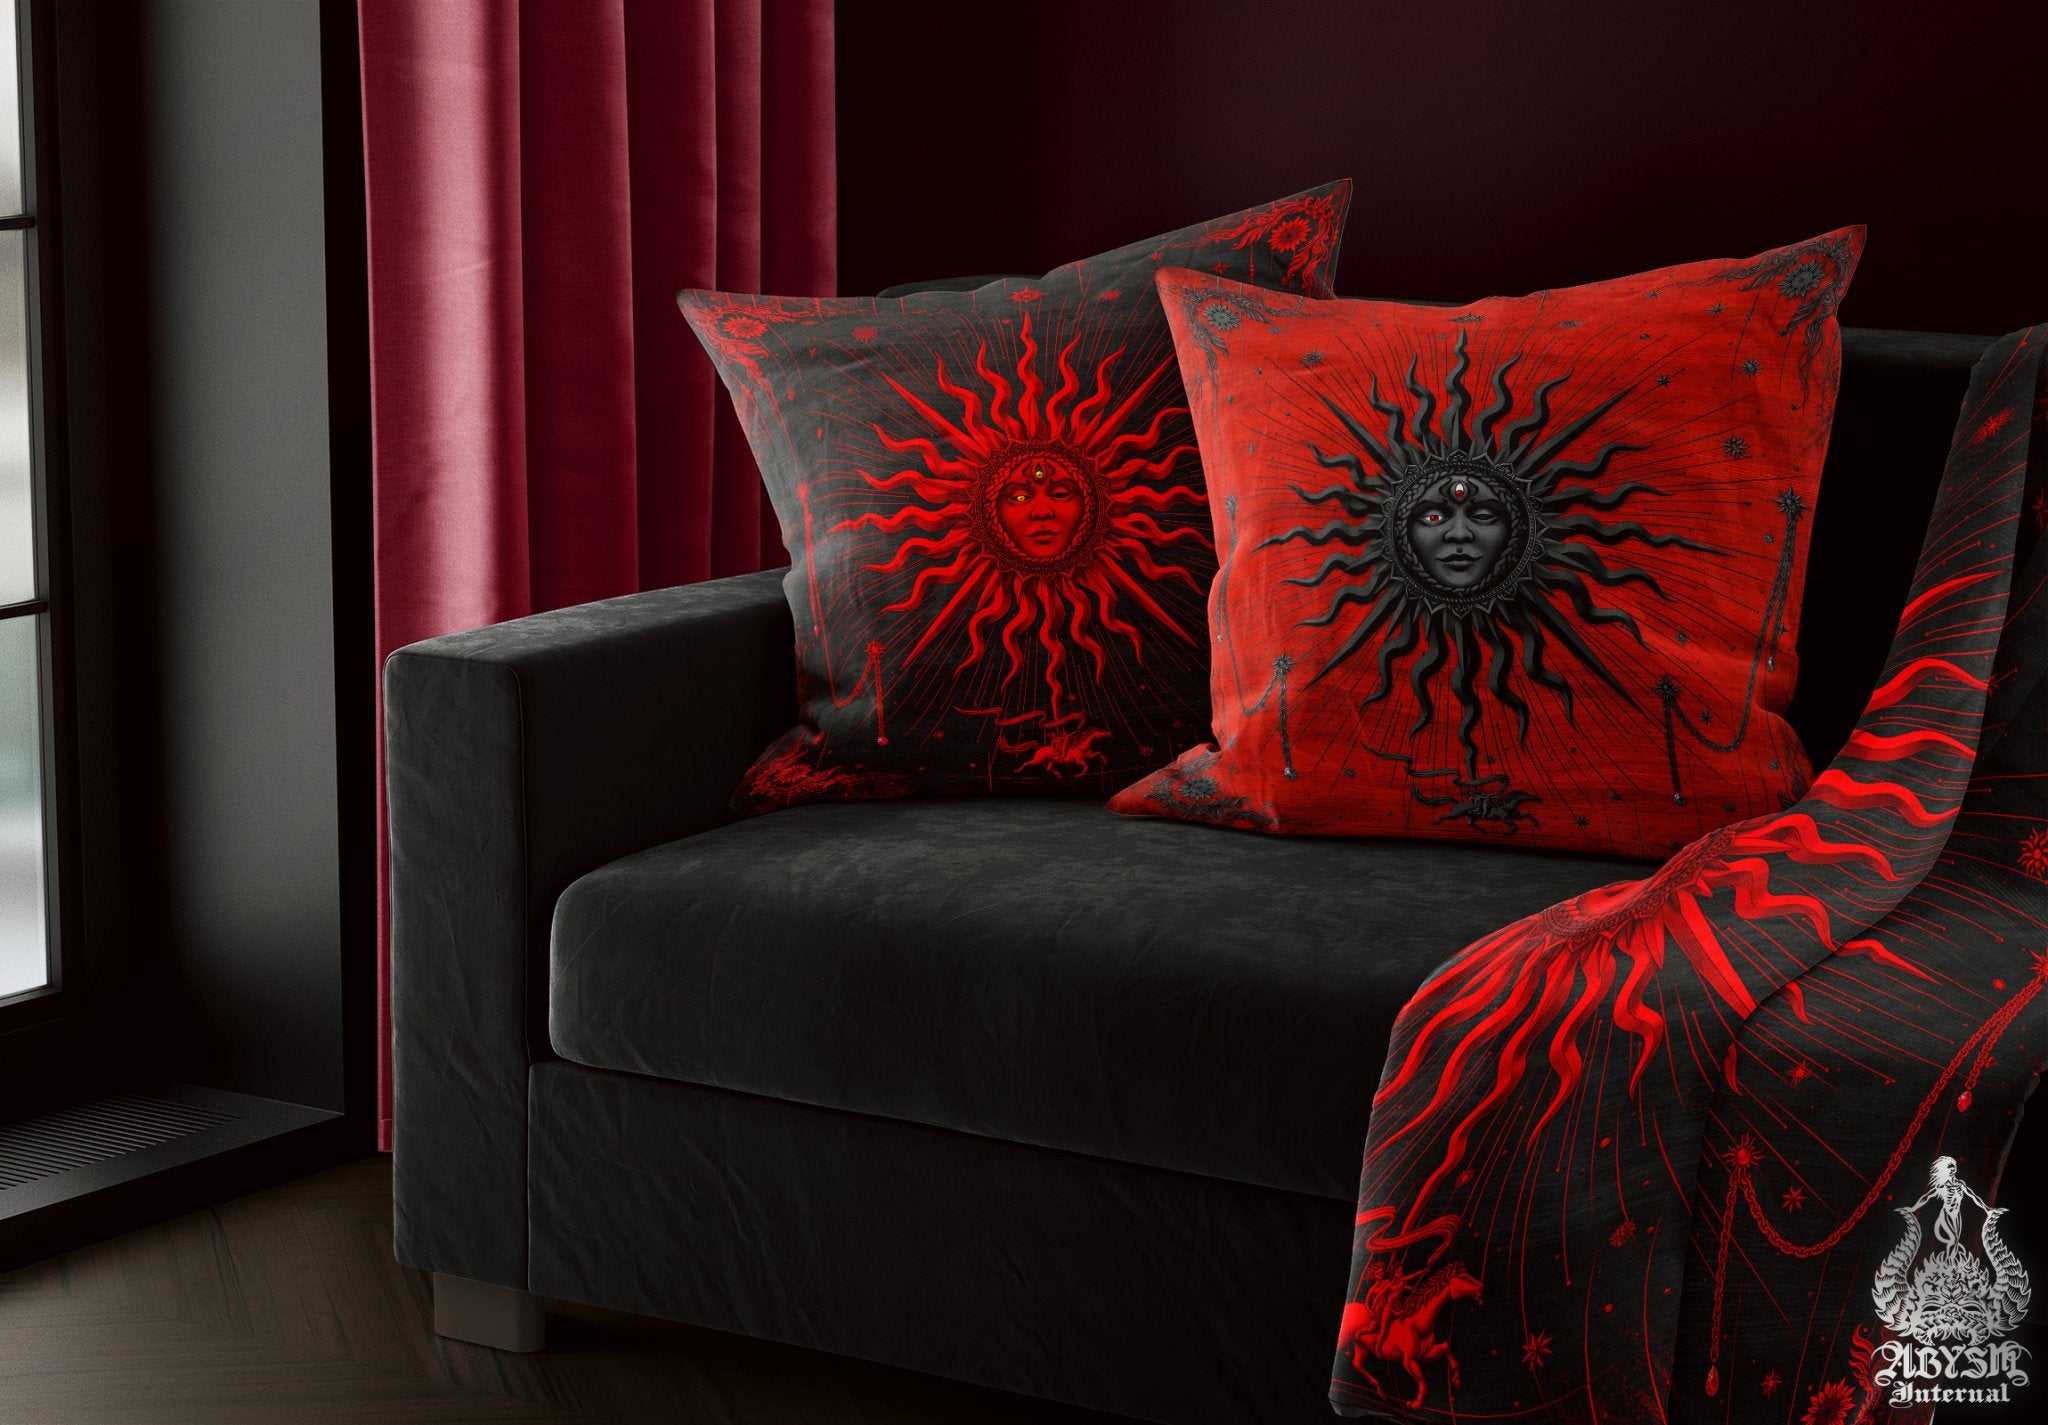 Gothic Sun Throw Pillow, Decorative Accent Pillow, Square Cushion Cover, Arcana Tarot Art, Alternative Home, Fortune & Magic Room Decor - Bloody Goth, Black Red - Abysm Internal